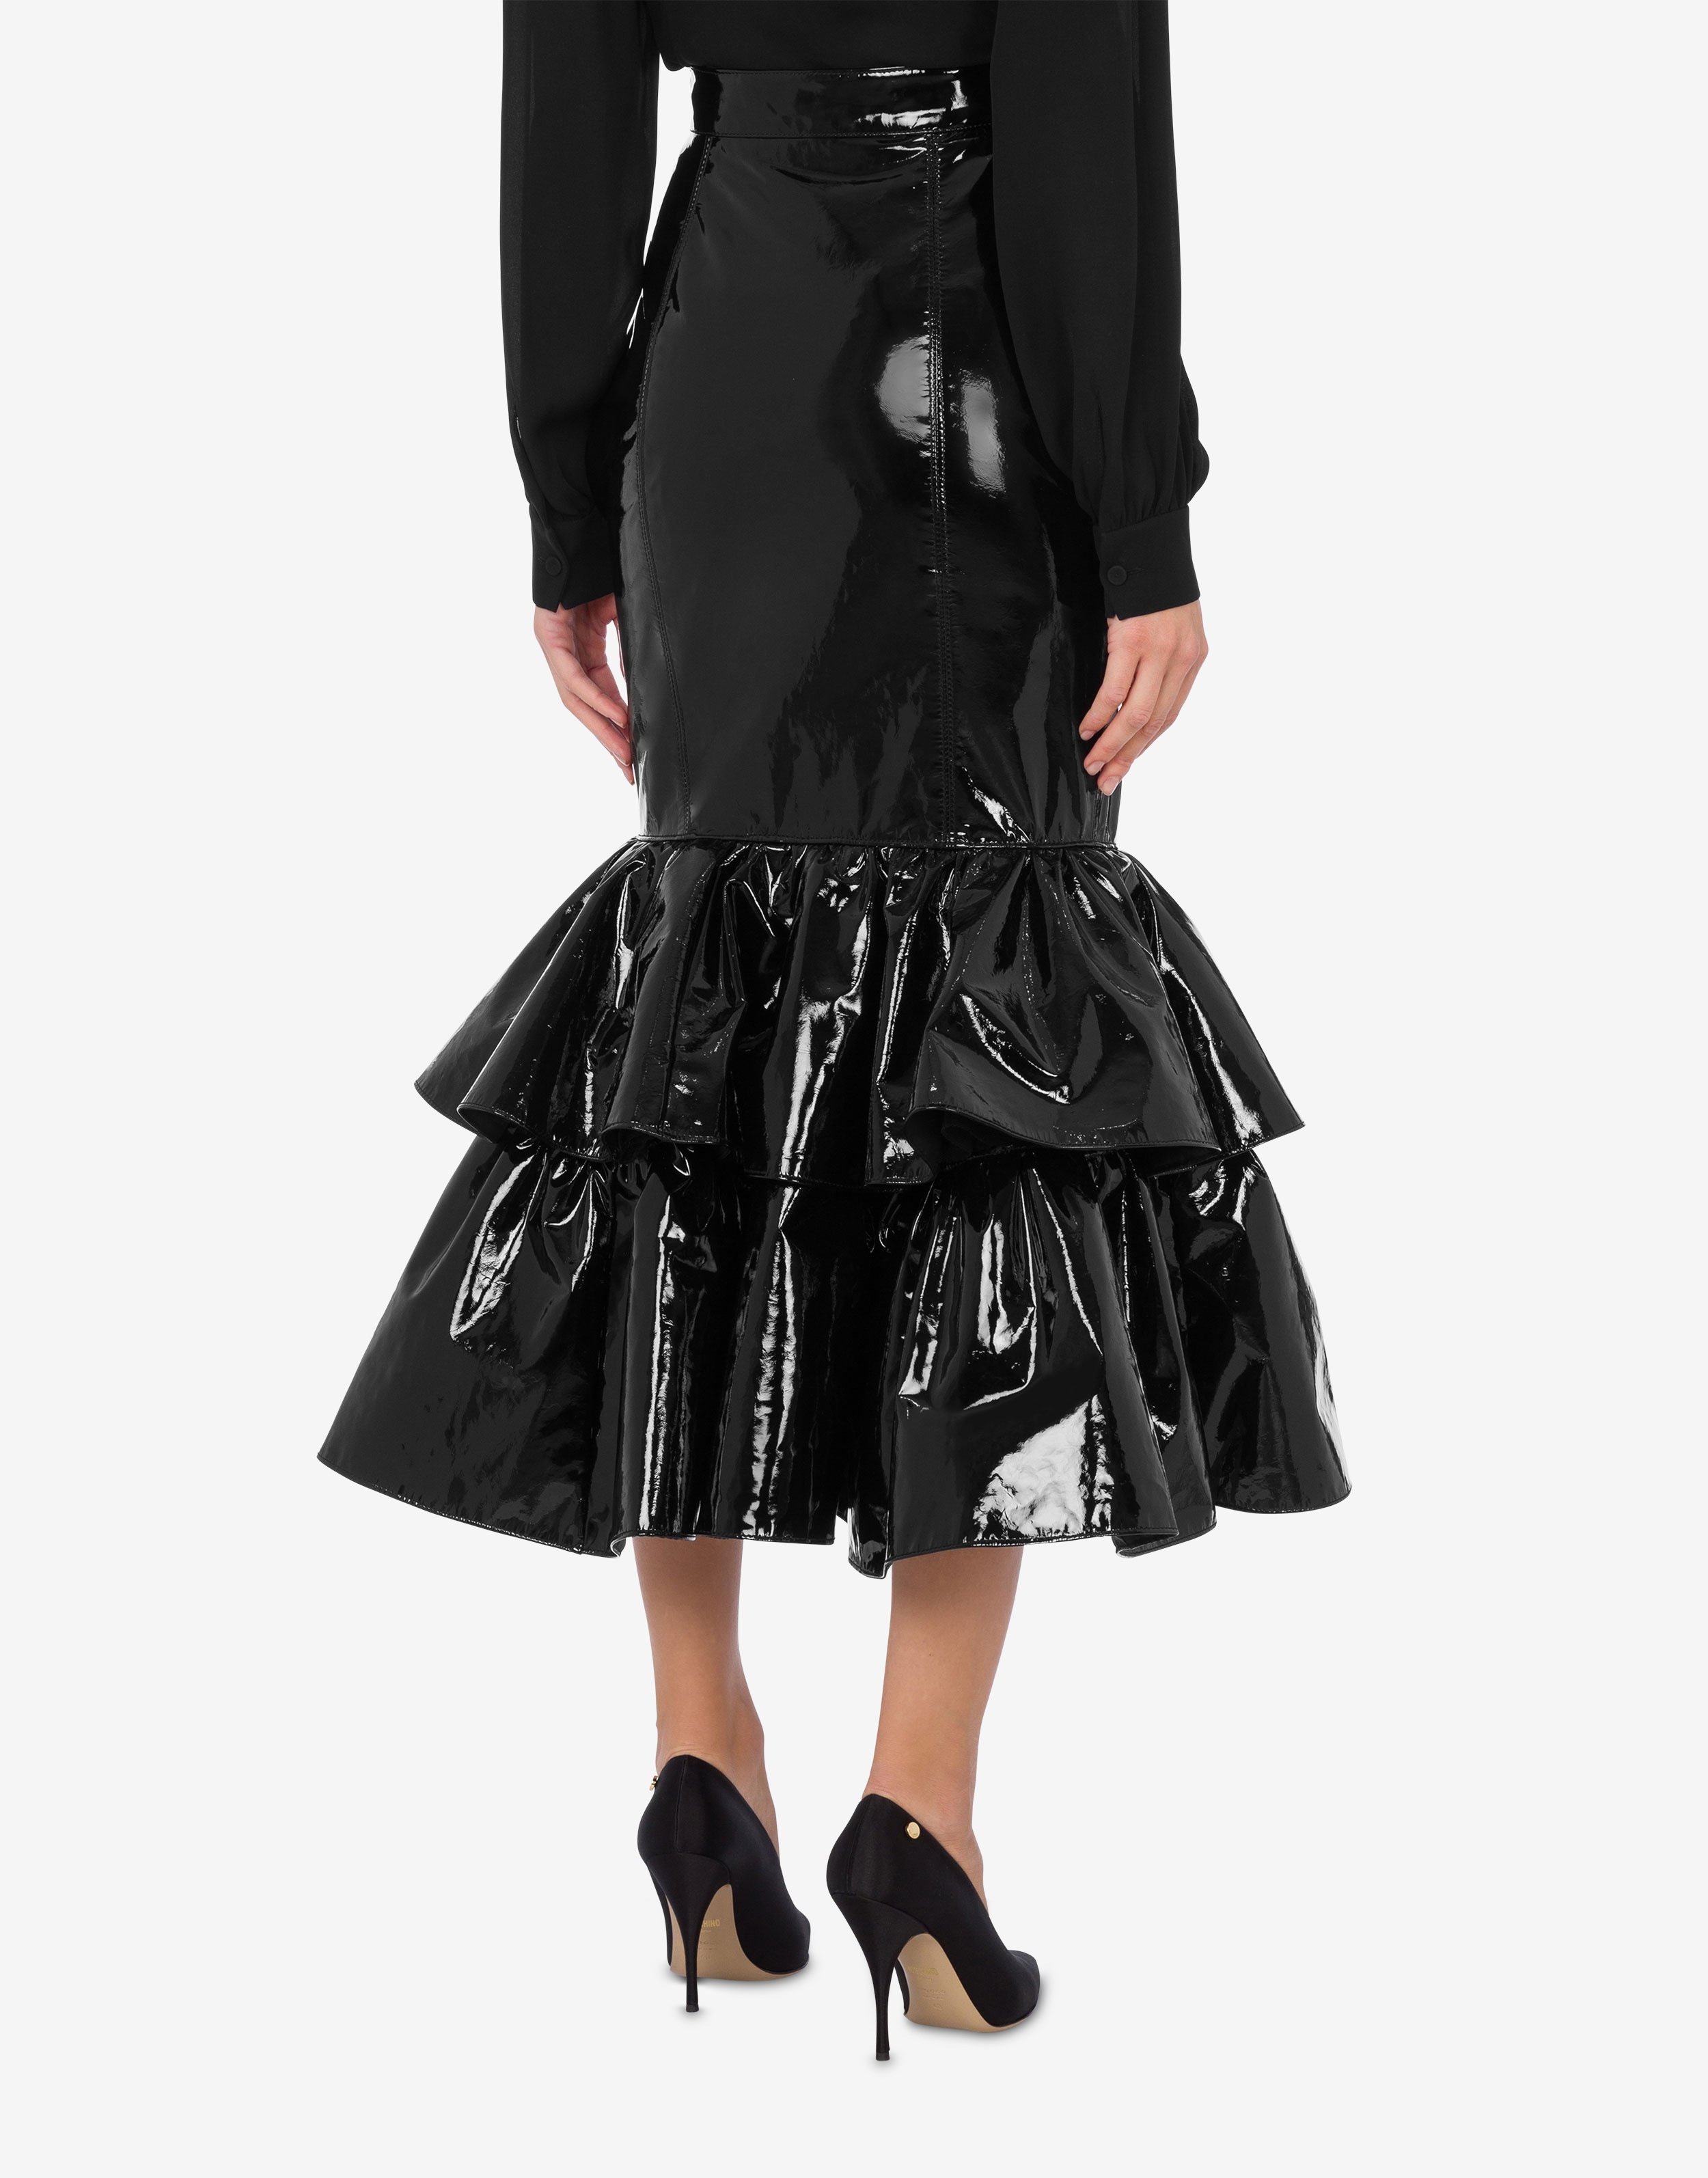 PATENT LEATHER SKIRT WITH RUFFLES - 3